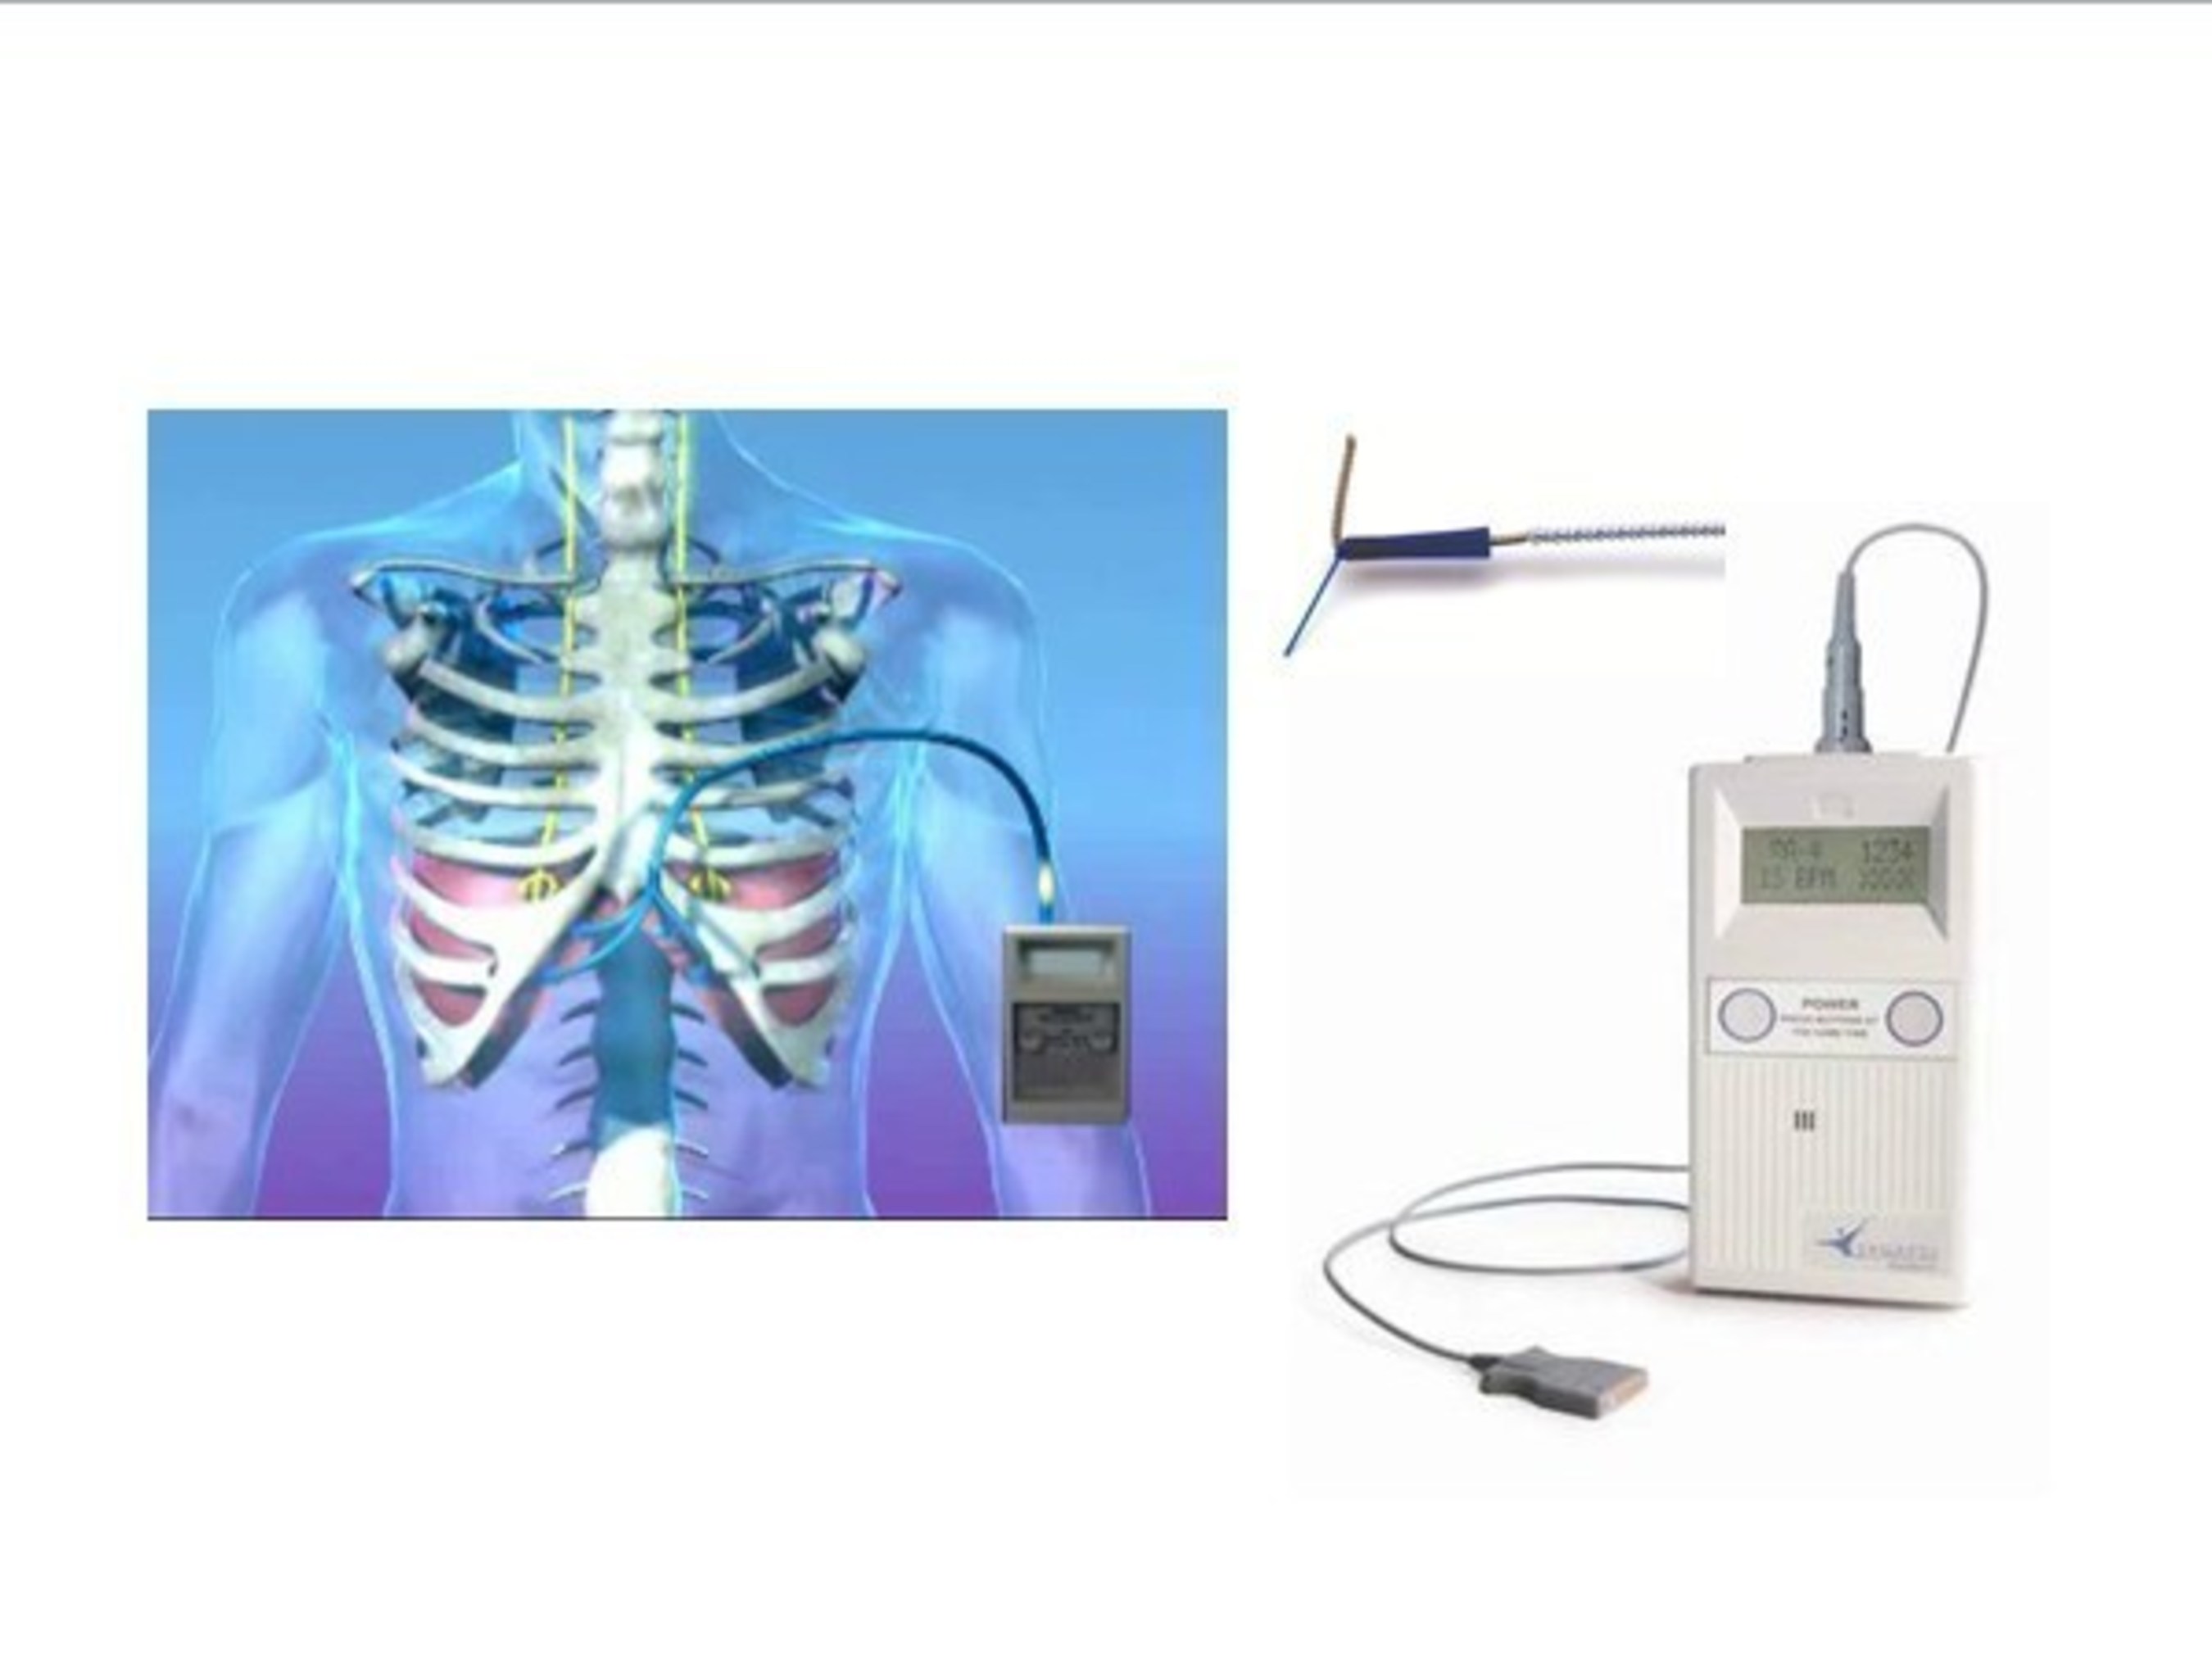 NeuRx Diaphragm Pacing System FDA approved for ALS patients with chronic hypoventilation and spinal cord injury (SCI) patients.